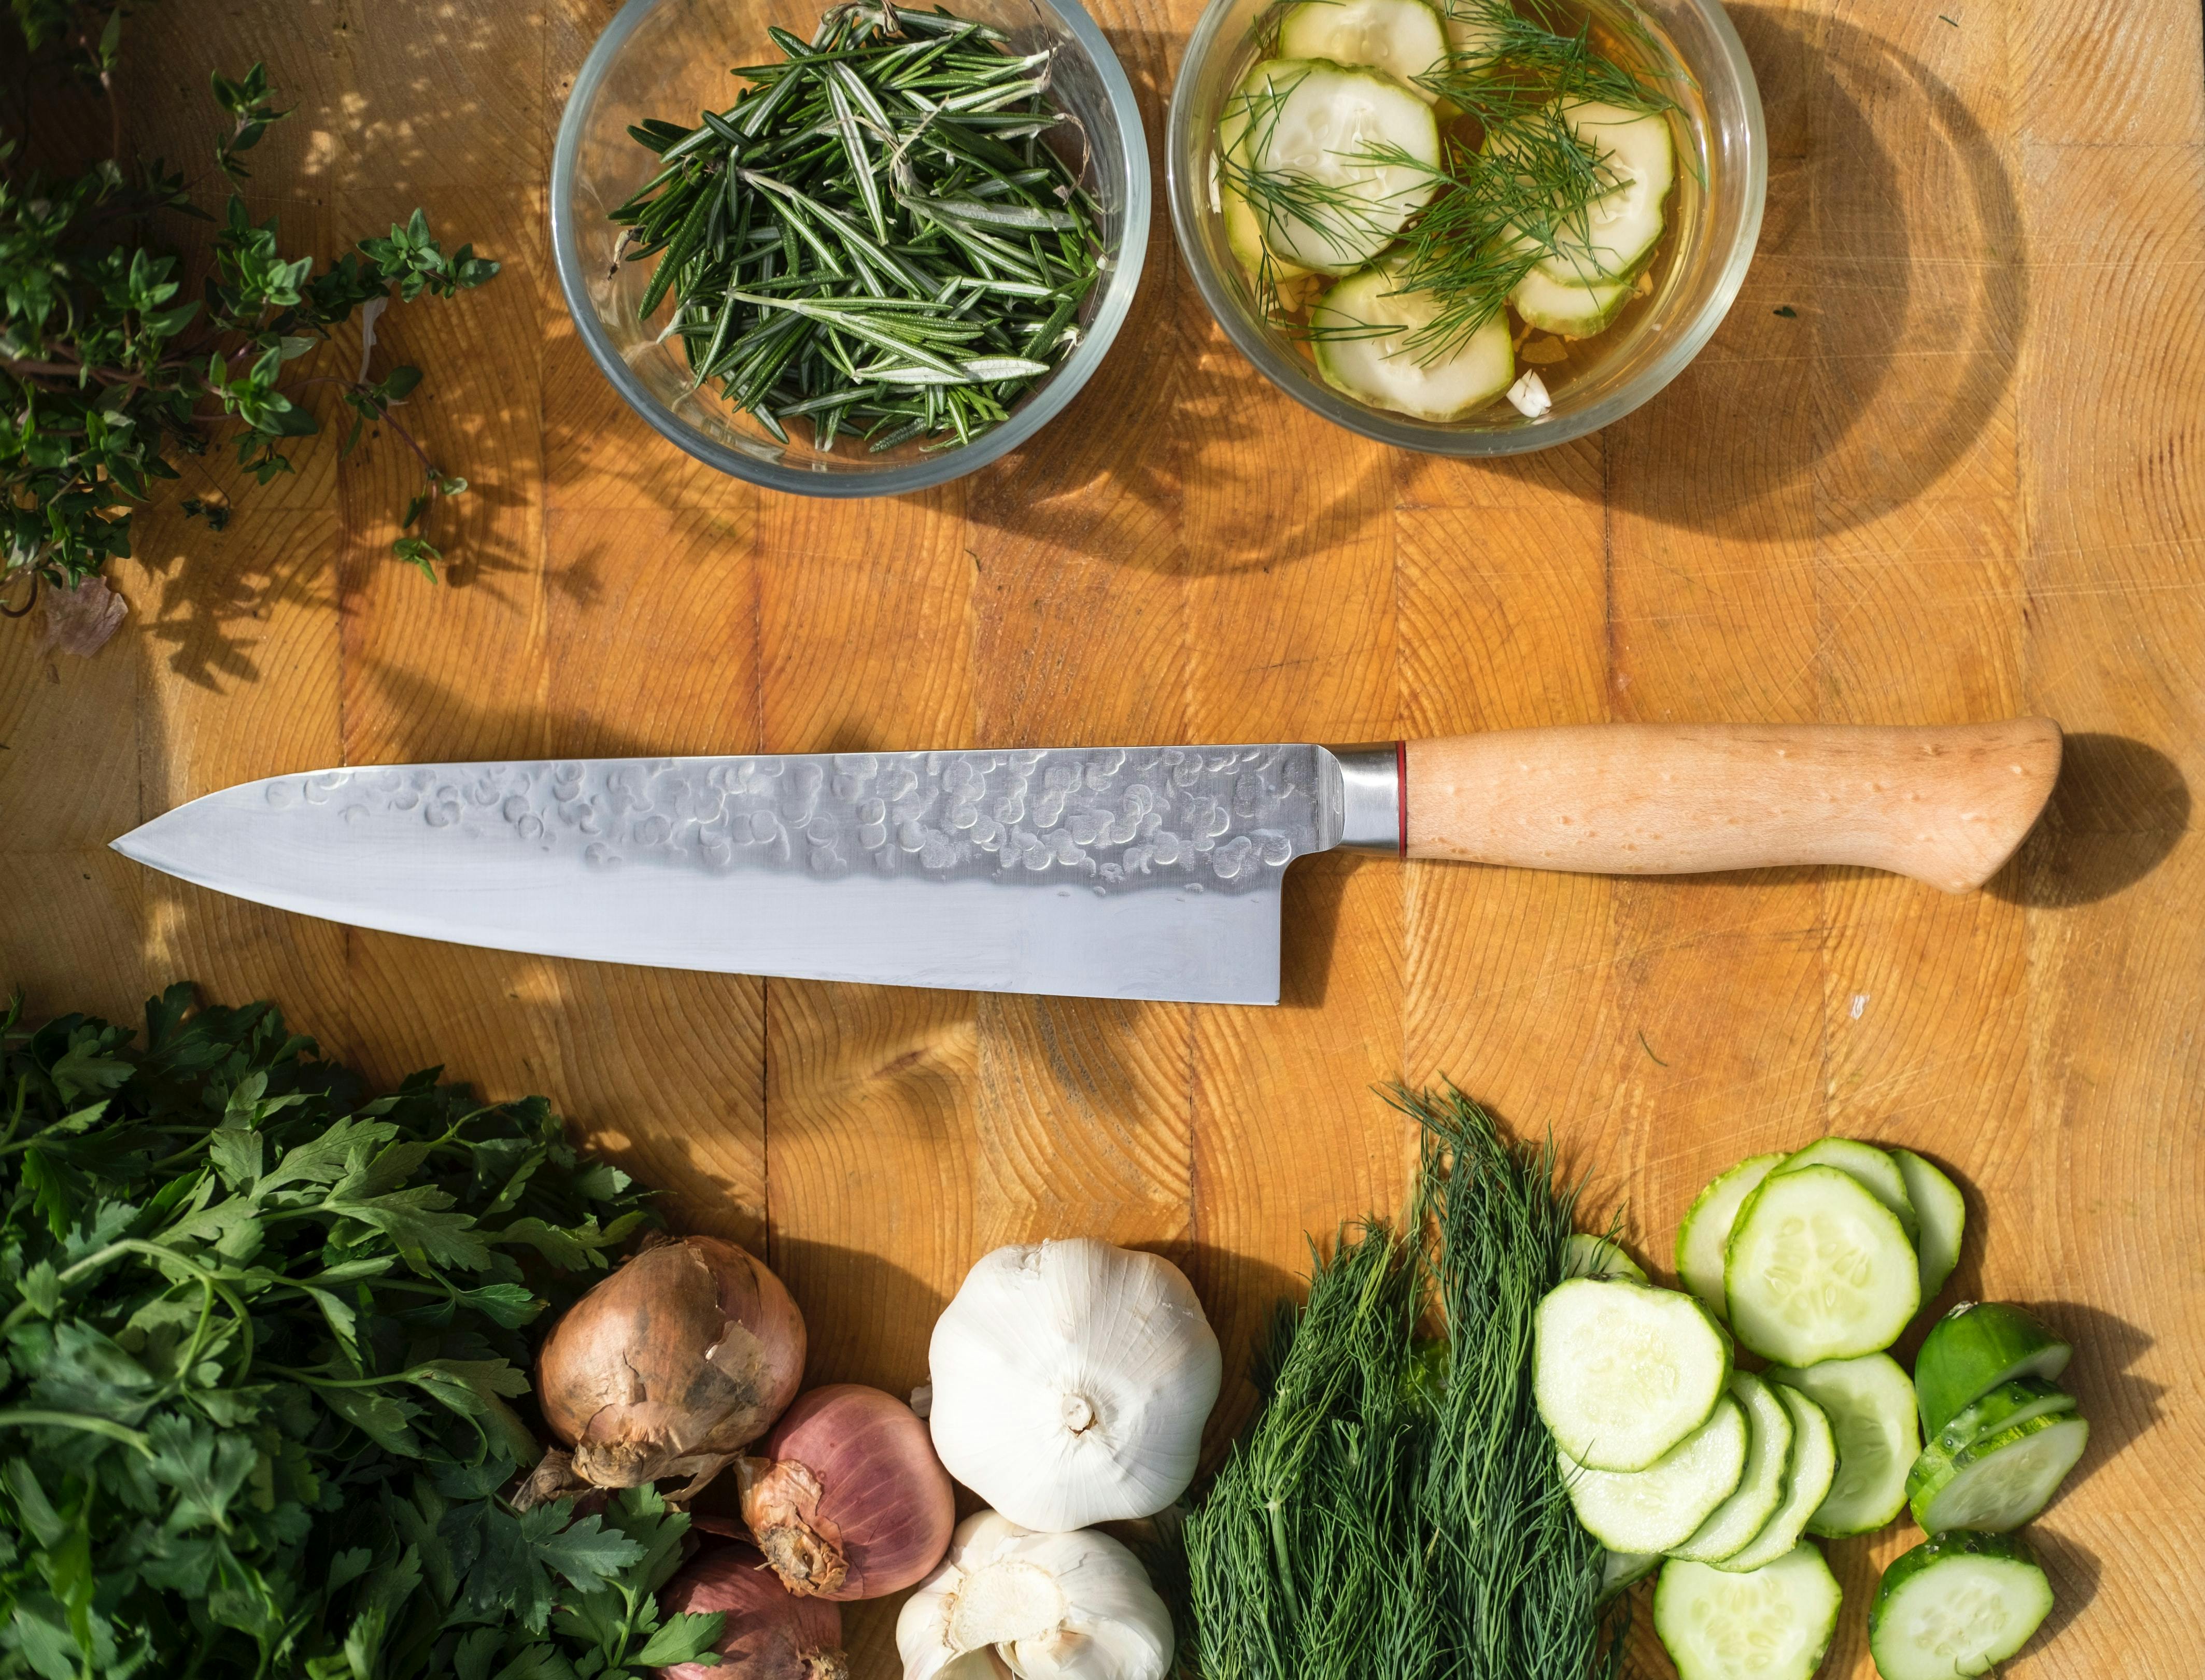 A knife lays next to some garlic and herbs.